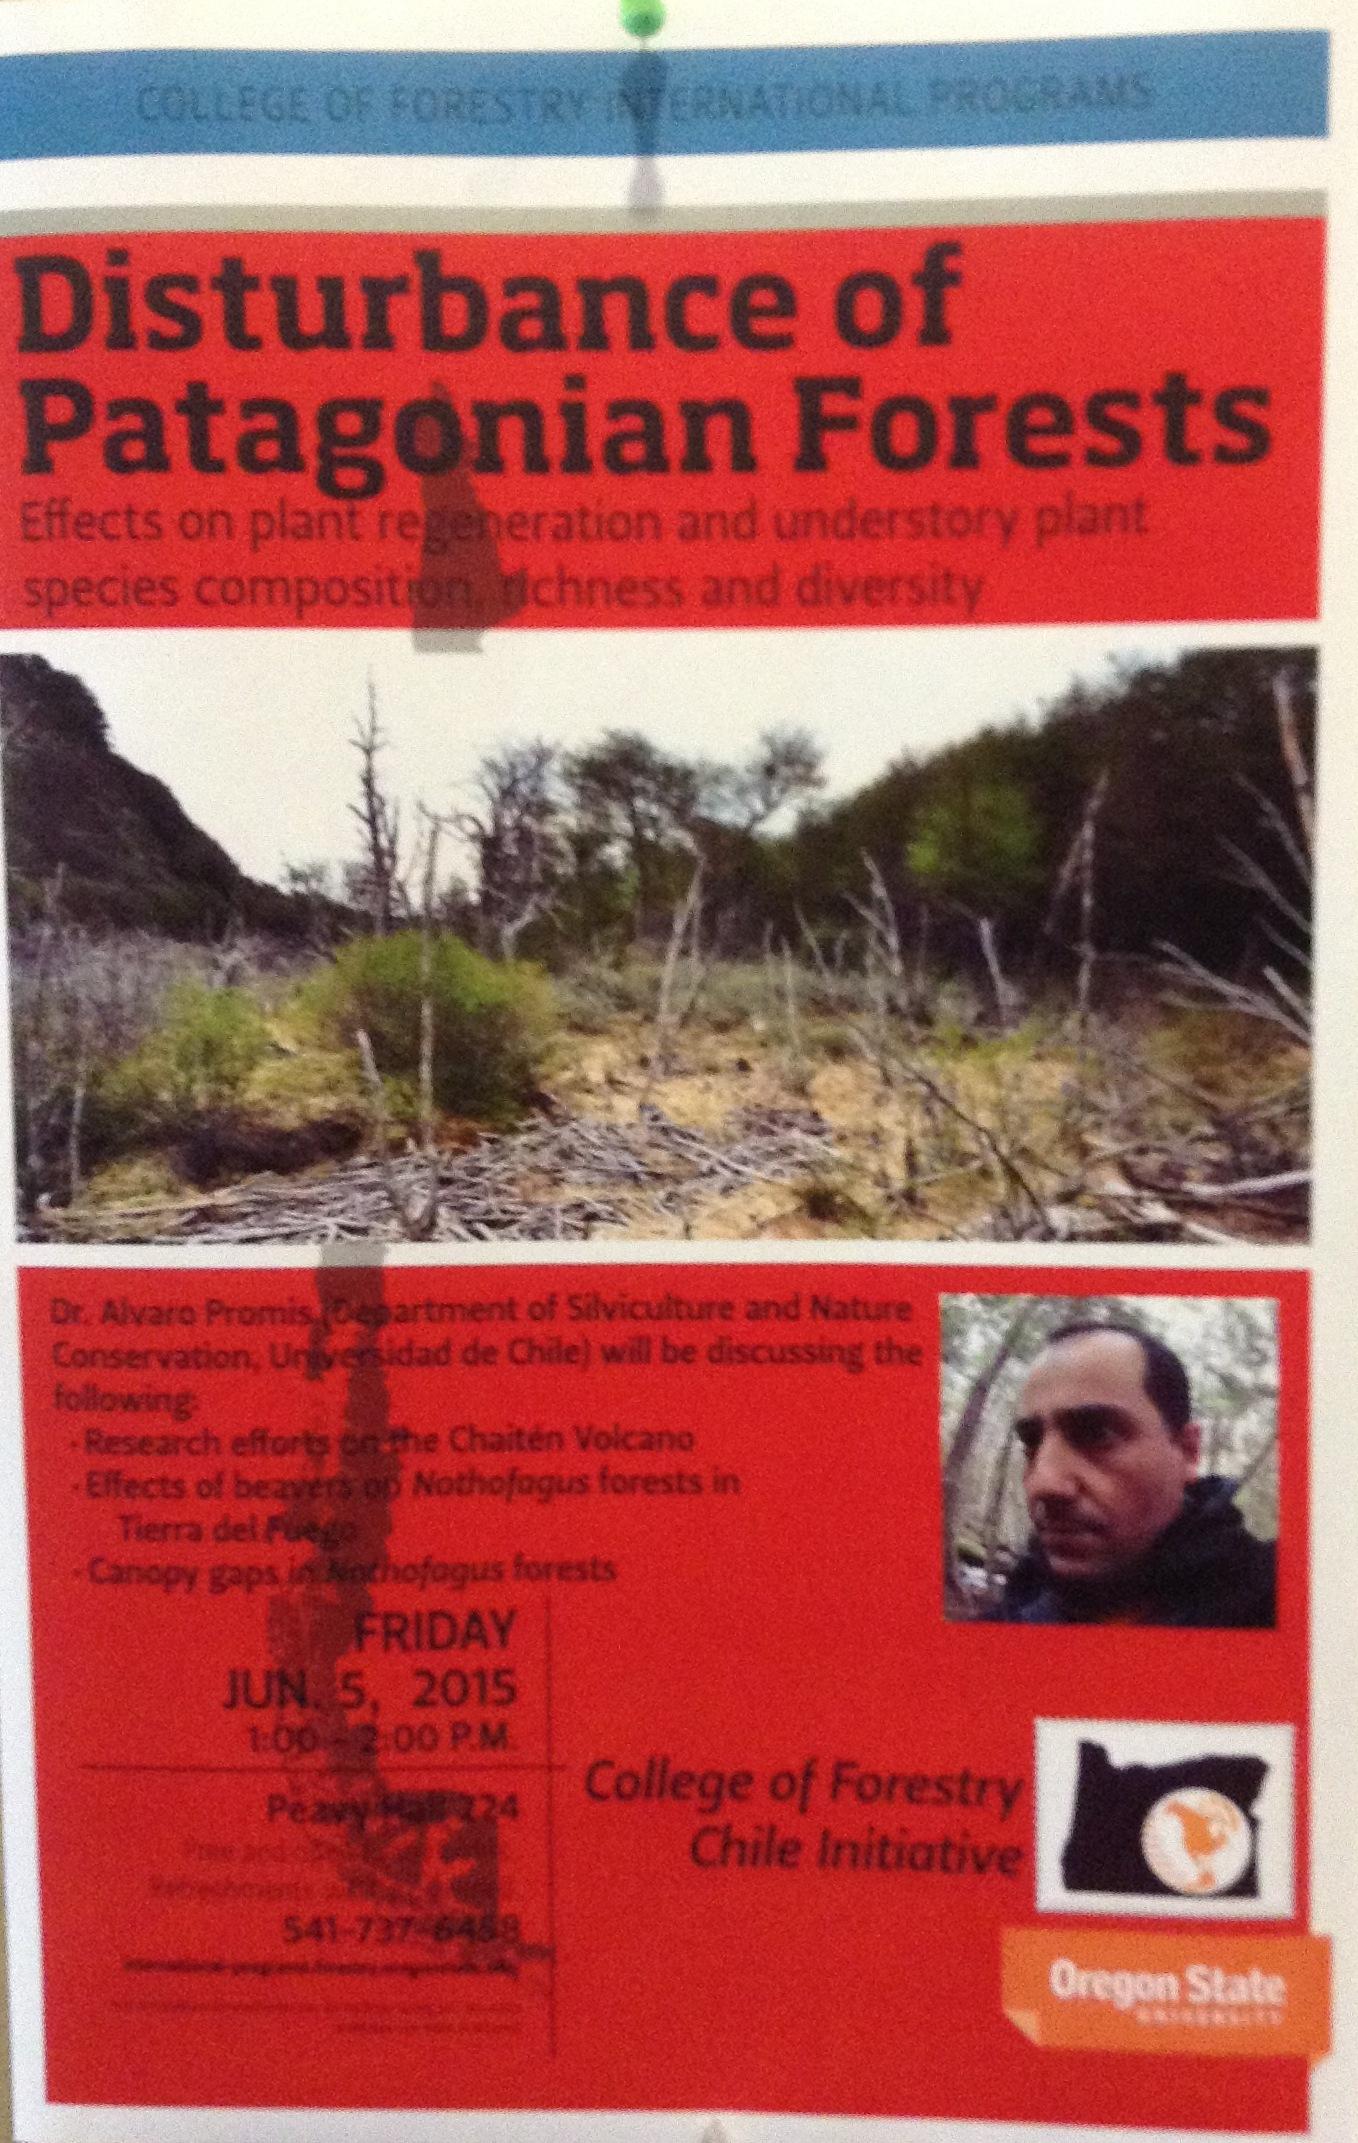 afiche charla "Disturbance of Patagonian Forests: Effects on plant regeneration and understory plant species composition, richness and diversity"